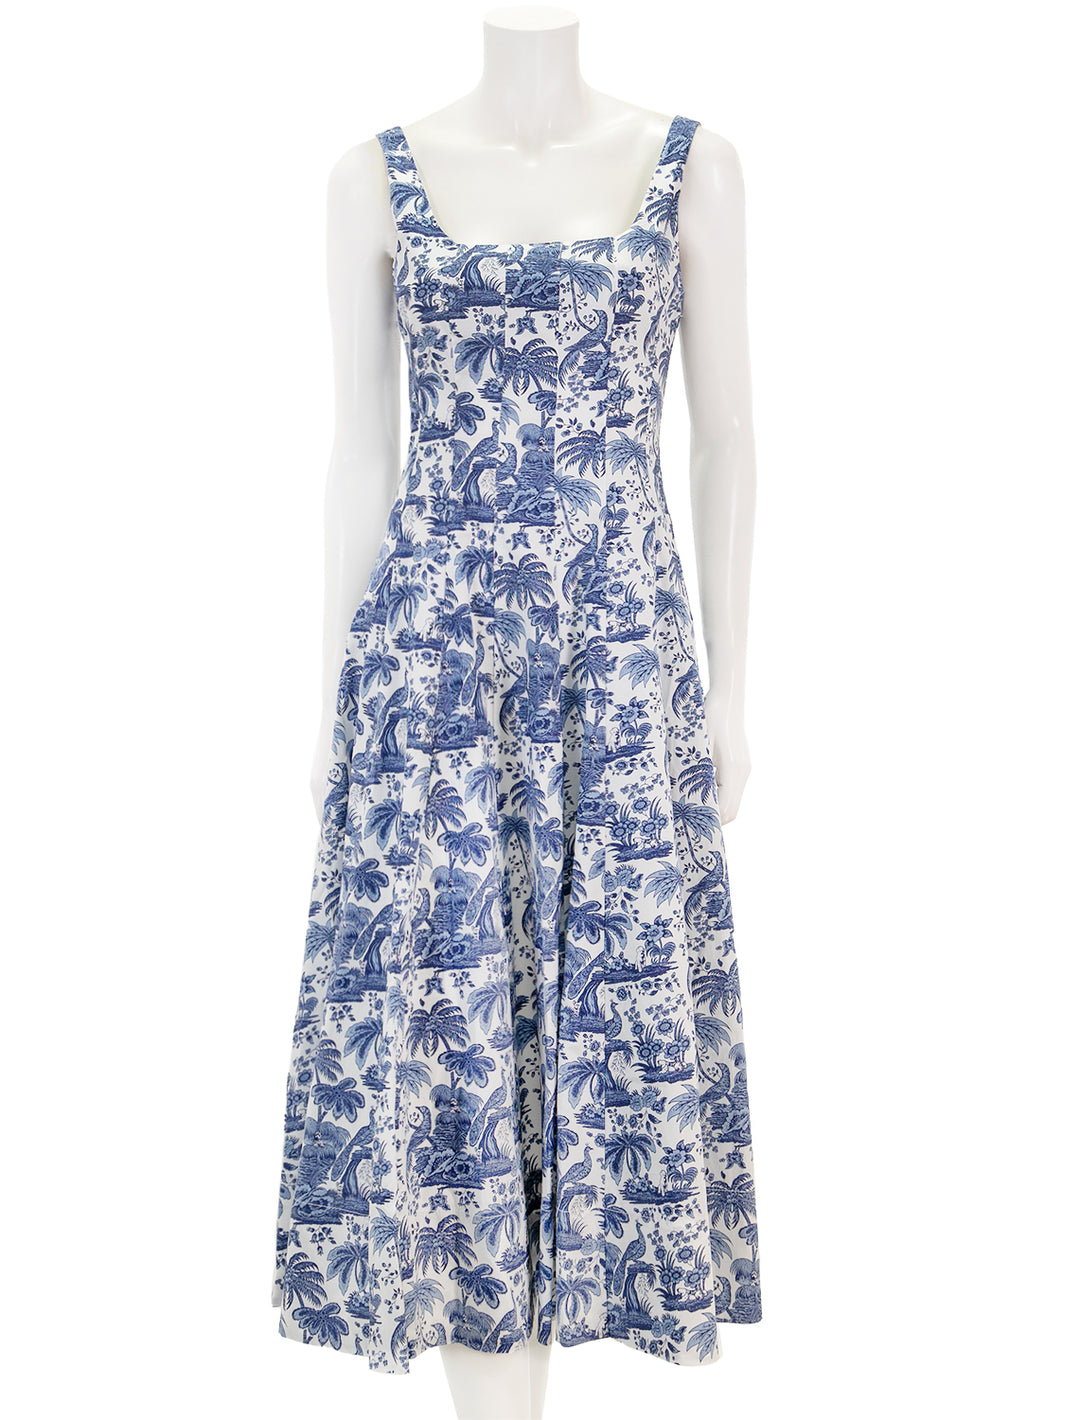 Front view of STAUD's wells dress in china blue toile.